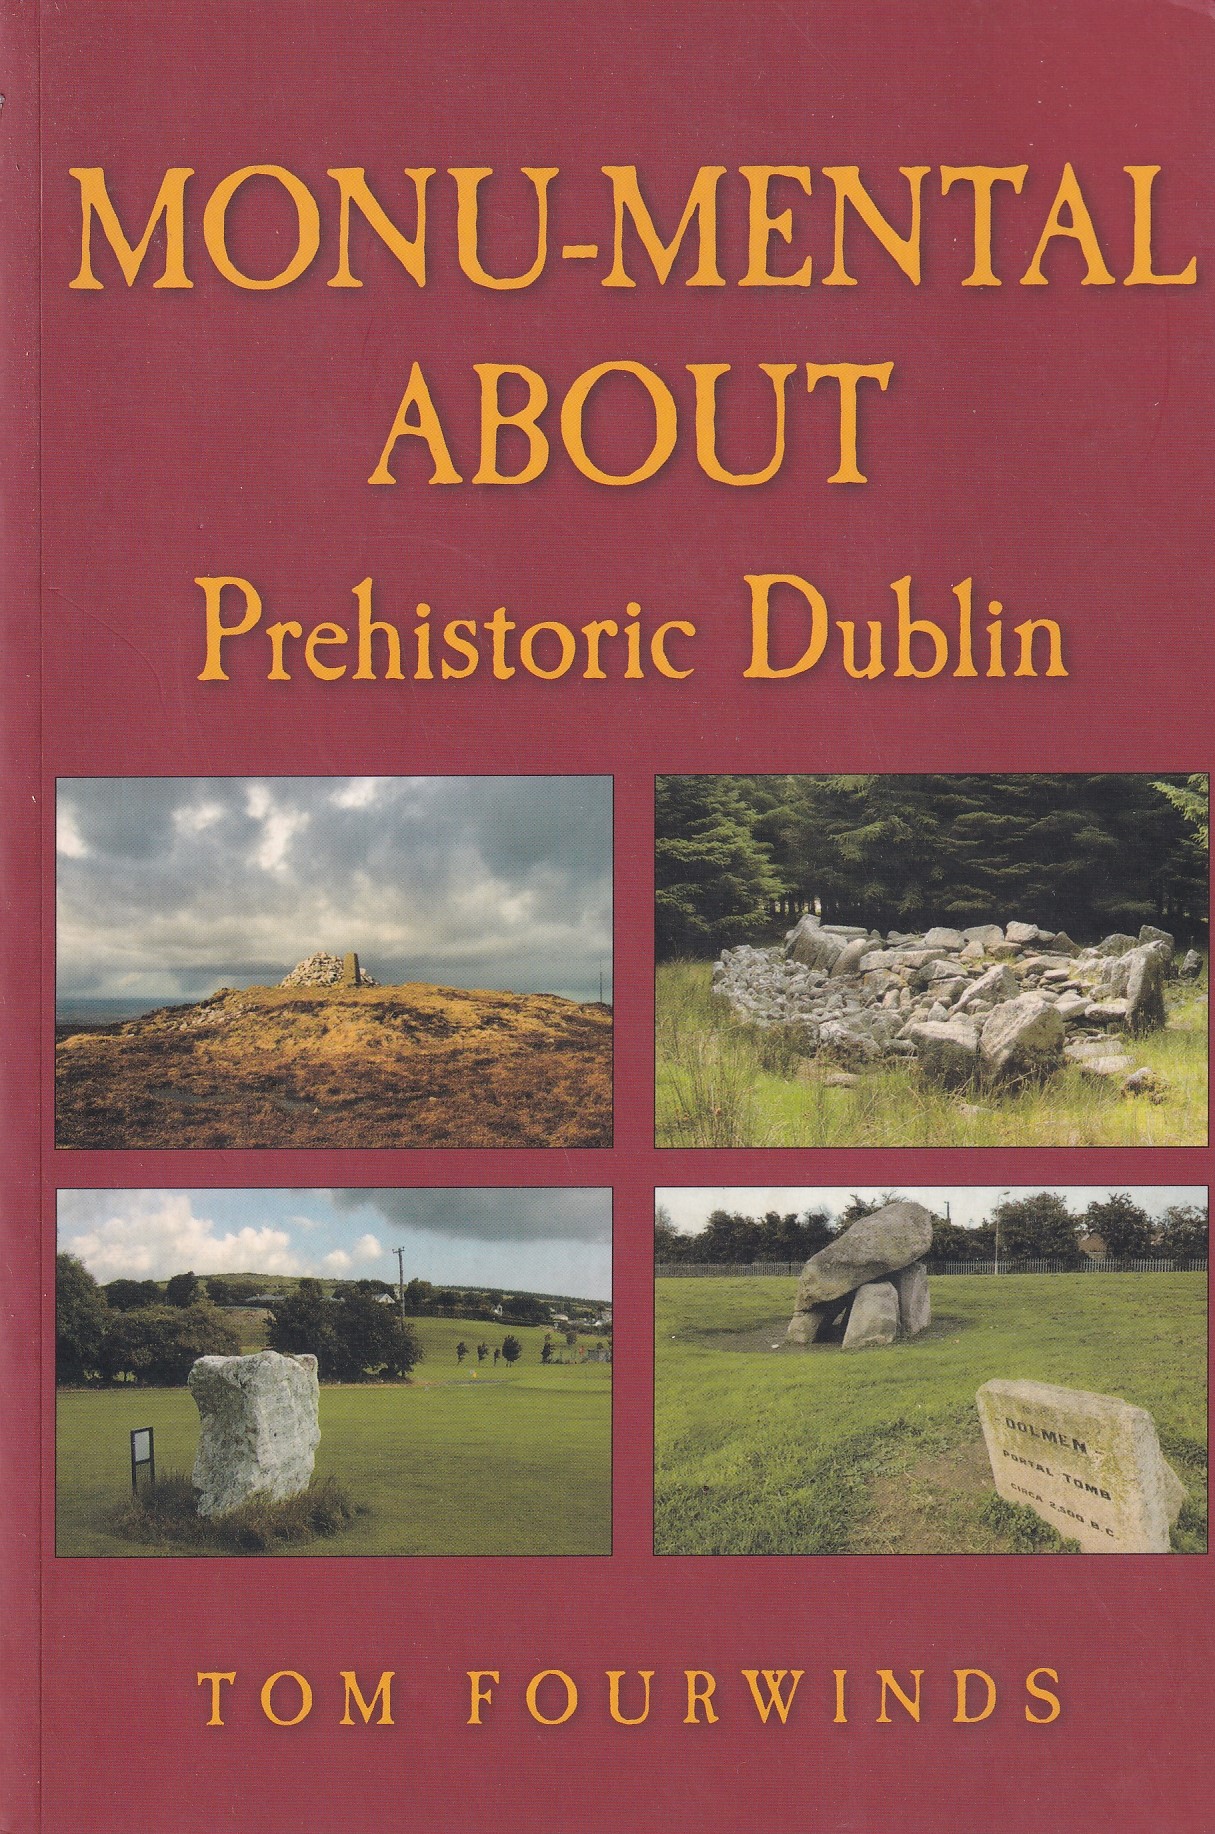 Monu-Mental About: Prehistoric Dublin by Tom Fourwinds